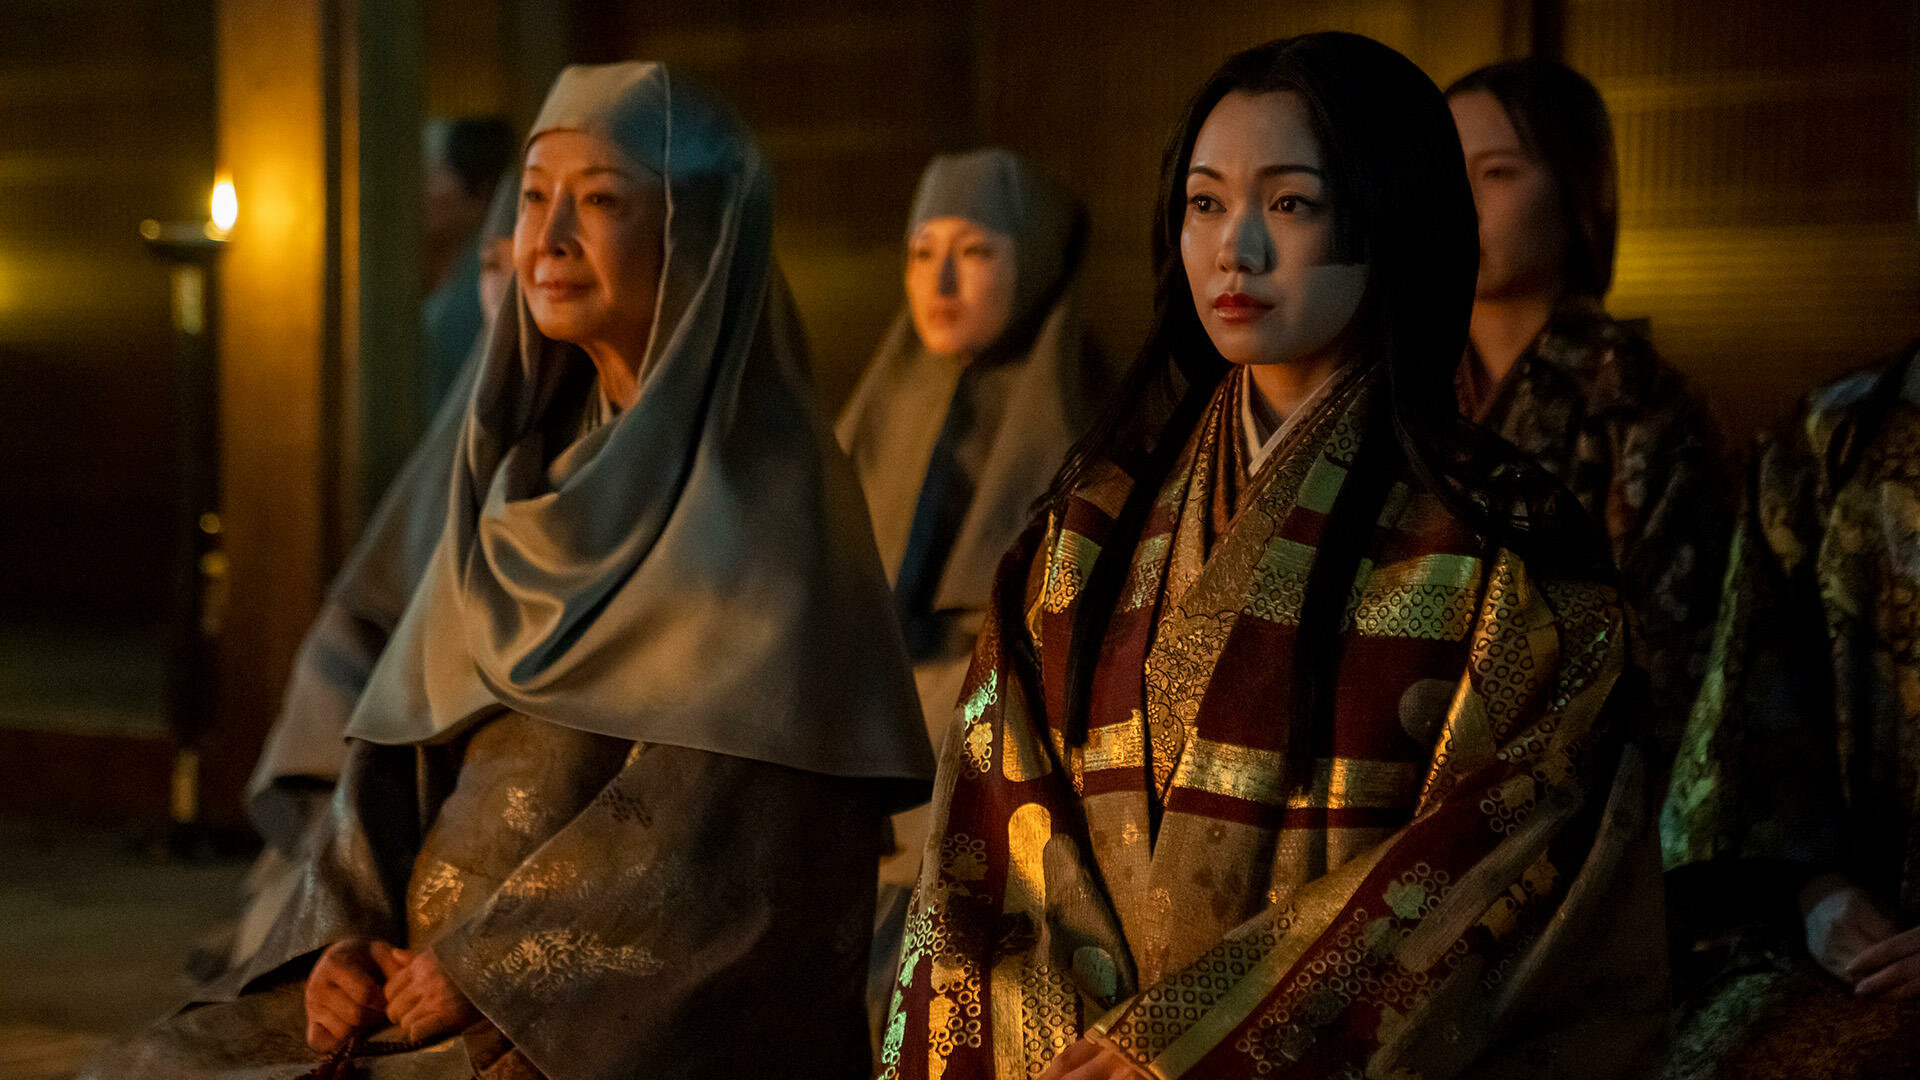 Shogun S1E6 Chapter Six: Ladies of the Willow World